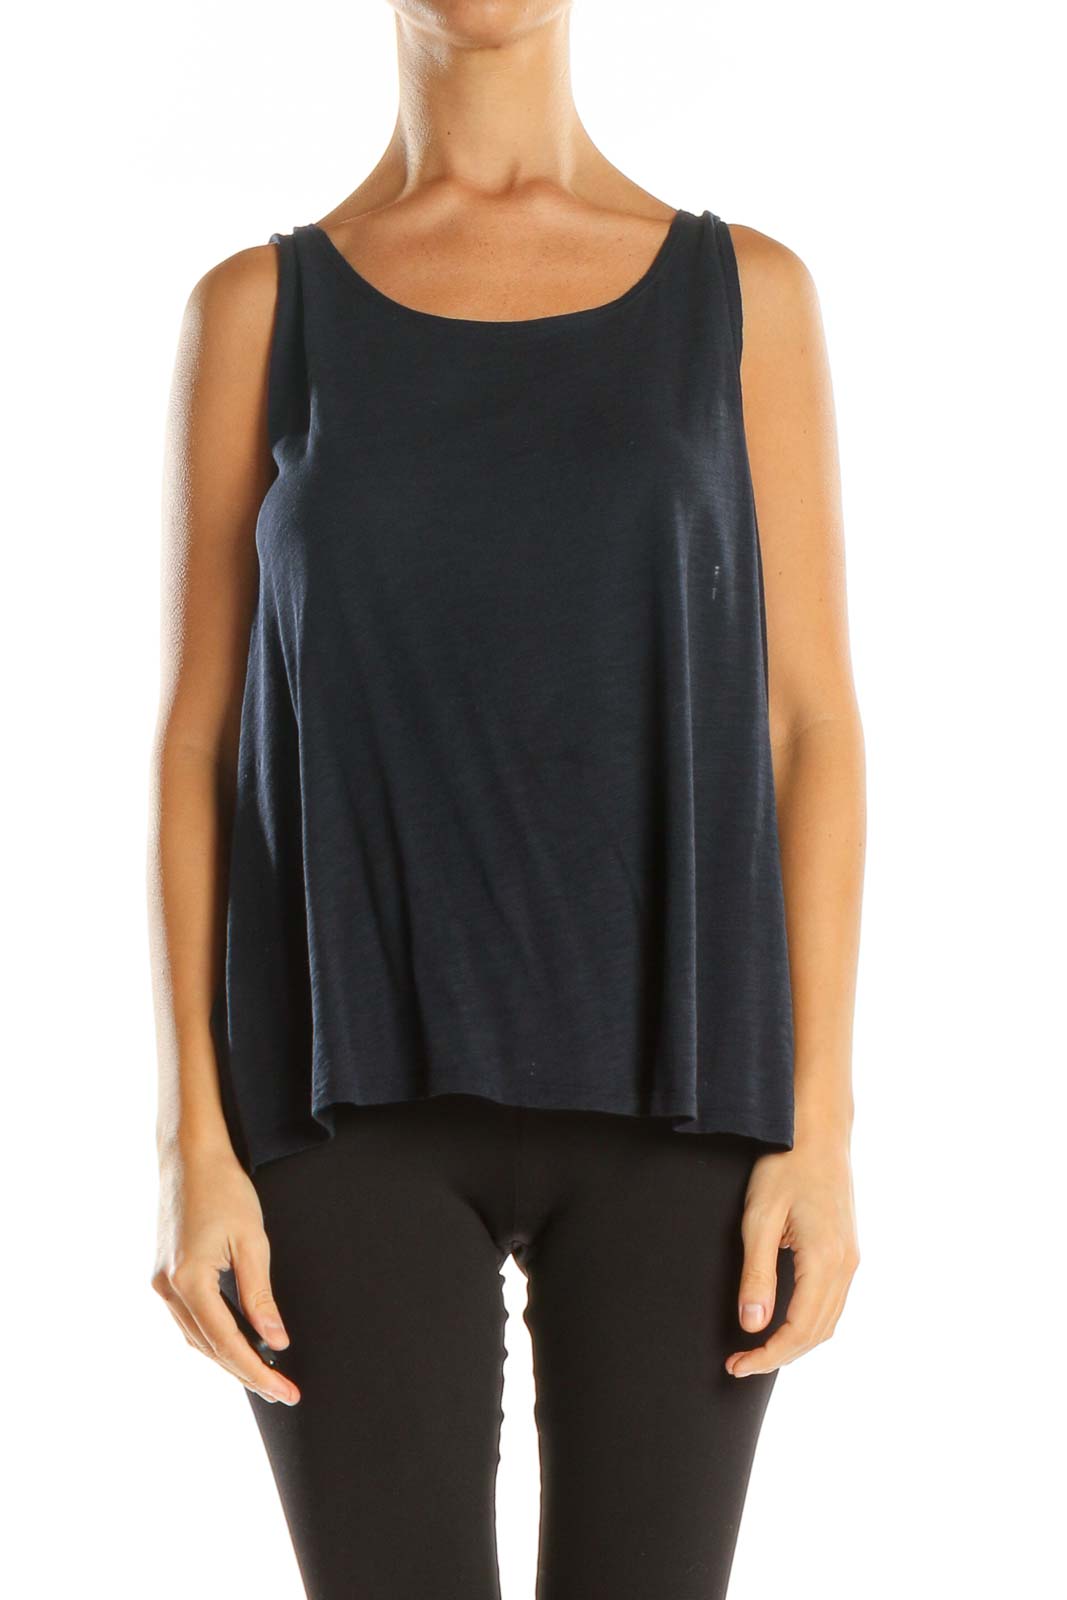 Blue Basic Top Front